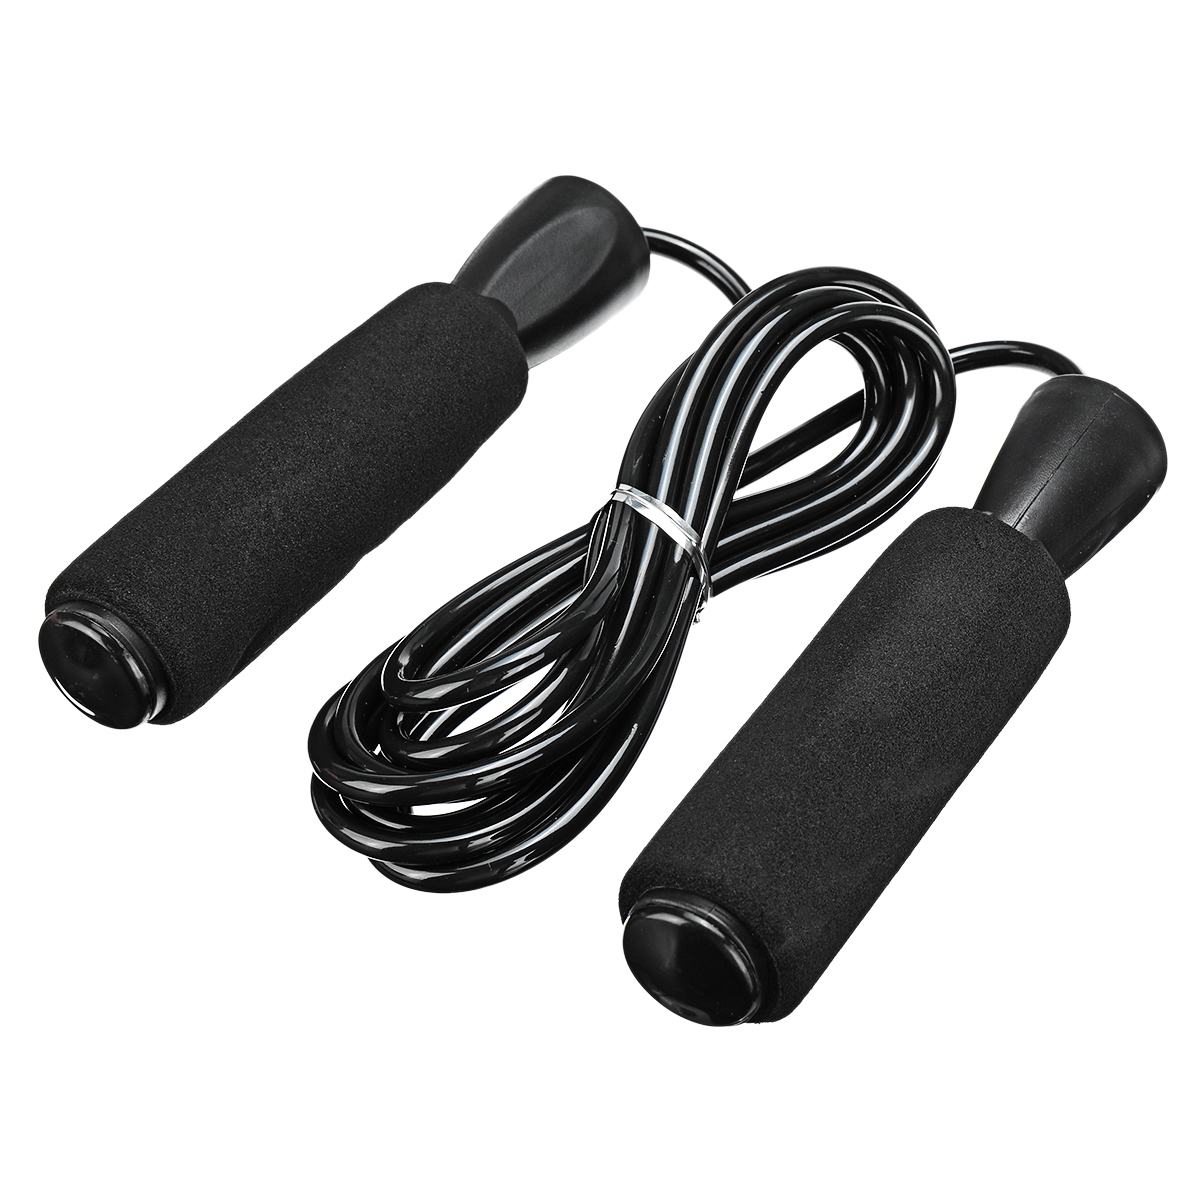 7 Pcs/Set Ab Rollers Kit Push-UP Bar Jump Rope Hand Gripper Knee Pad Resistance Band Exercise Training Home Gym Fitness Equipment